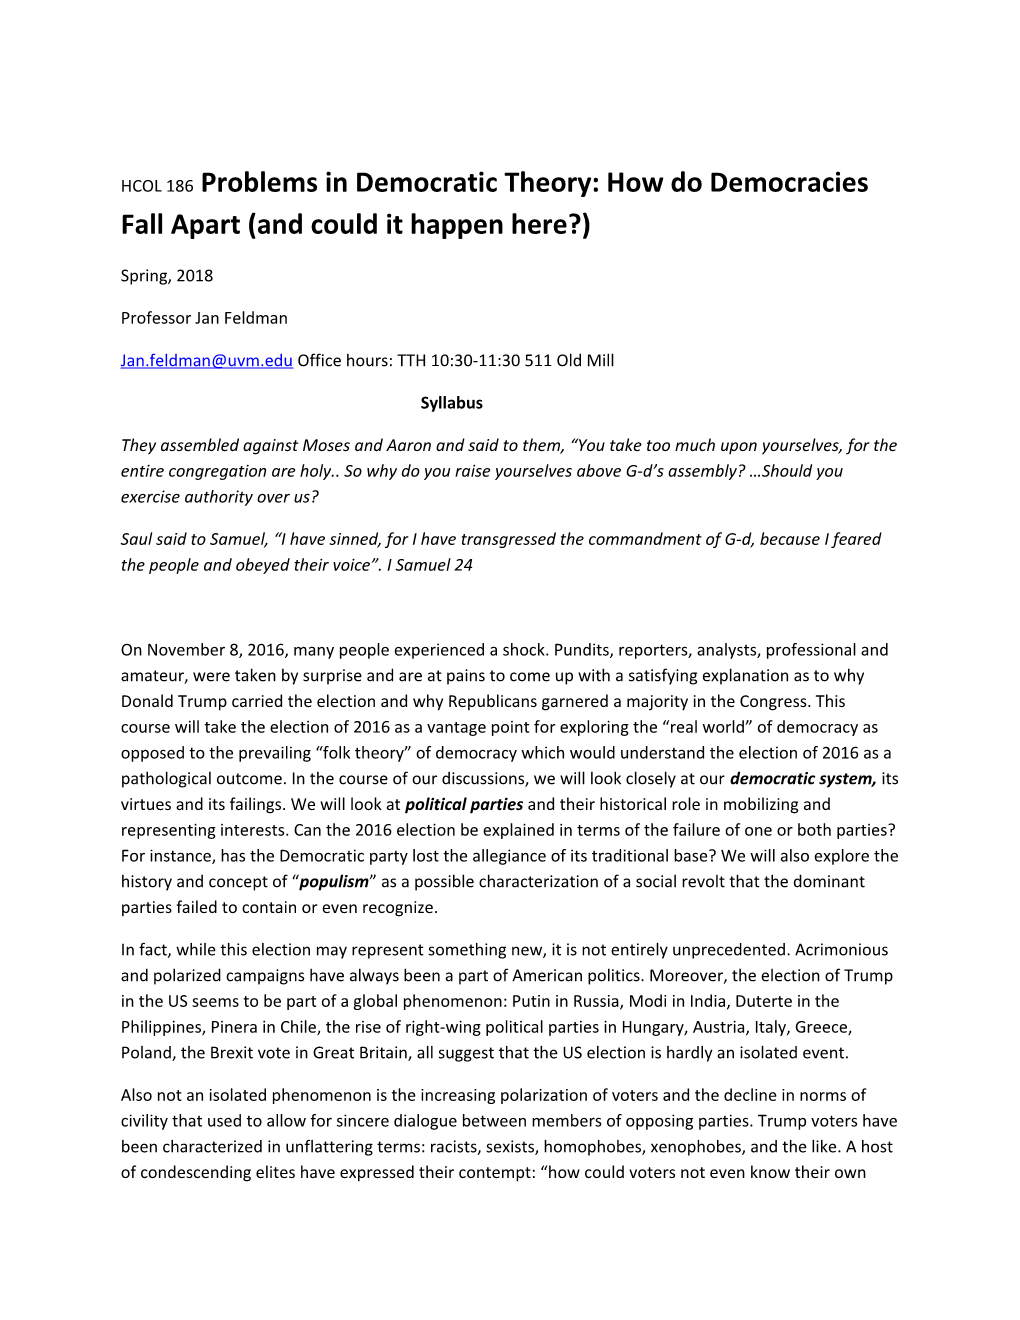 HCOL 186 Problems in Democratic Theory: How Do Democracies Fall Apart (And Could It Happen